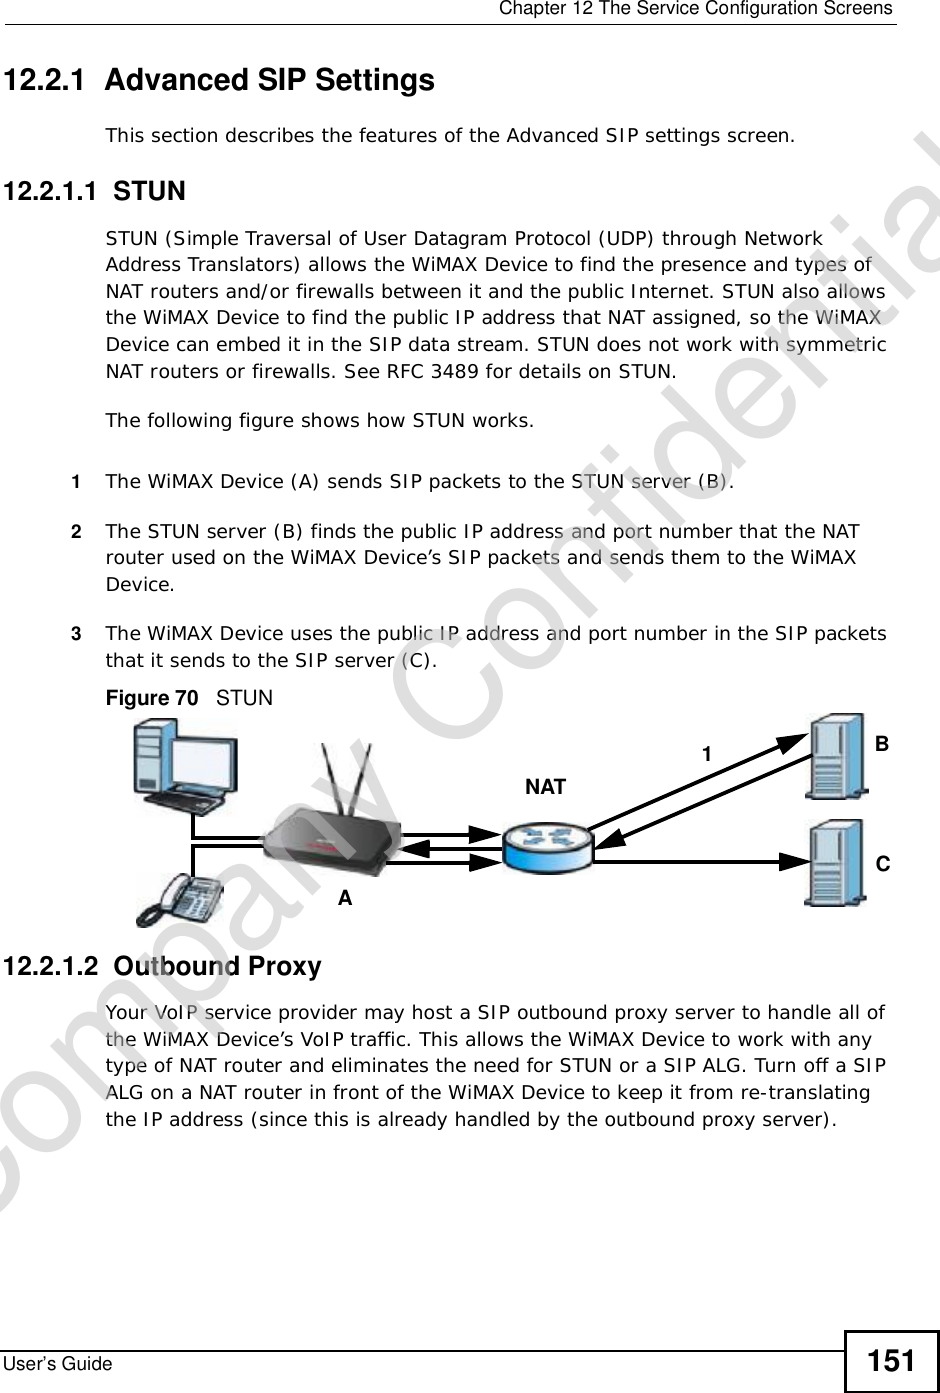  Chapter 12The Service Configuration ScreensUser’s Guide 15112.2.1  Advanced SIP SettingsThis section describes the features of the Advanced SIP settings screen.12.2.1.1  STUNSTUN (Simple Traversal of User Datagram Protocol (UDP) through Network Address Translators) allows the WiMAX Device to find the presence and types of NAT routers and/or firewalls between it and the public Internet. STUN also allows the WiMAX Device to find the public IP address that NAT assigned, so the WiMAX Device can embed it in the SIP data stream. STUN does not work with symmetric NAT routers or firewalls. See RFC 3489 for details on STUN.The following figure shows how STUN works. 1The WiMAX Device (A) sends SIP packets to the STUN server (B).2The STUN server (B) finds the public IP address and port number that the NAT router used on the WiMAX Device’s SIP packets and sends them to the WiMAX Device.3The WiMAX Device uses the public IP address and port number in the SIP packets that it sends to the SIP server (C).Figure 70   STUN12.2.1.2  Outbound ProxyYour VoIP service provider may host a SIP outbound proxy server to handle all of the WiMAX Device’s VoIP traffic. This allows the WiMAX Device to work with any type of NAT router and eliminates the need for STUN or a SIP ALG. Turn off a SIP ALG on a NAT router in front of the WiMAX Device to keep it from re-translating the IP address (since this is already handled by the outbound proxy server).ABCNAT1Company Confidential